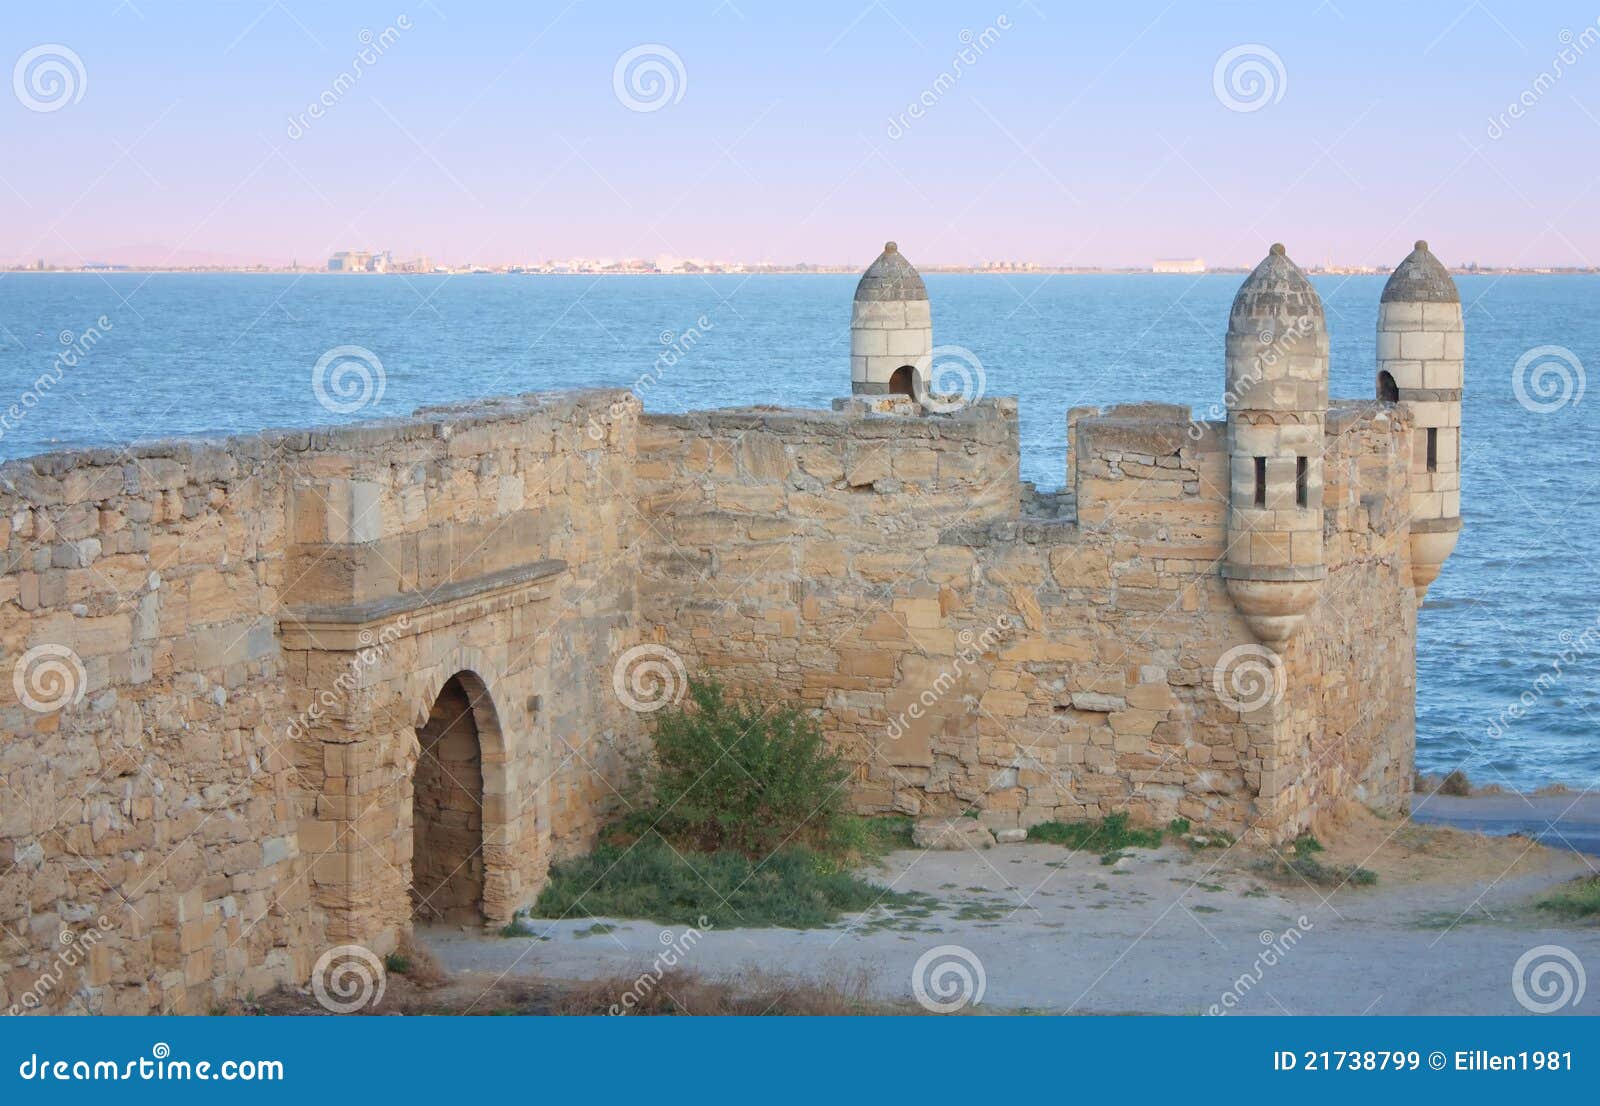 yeni-kale, ancient fortress in kerch